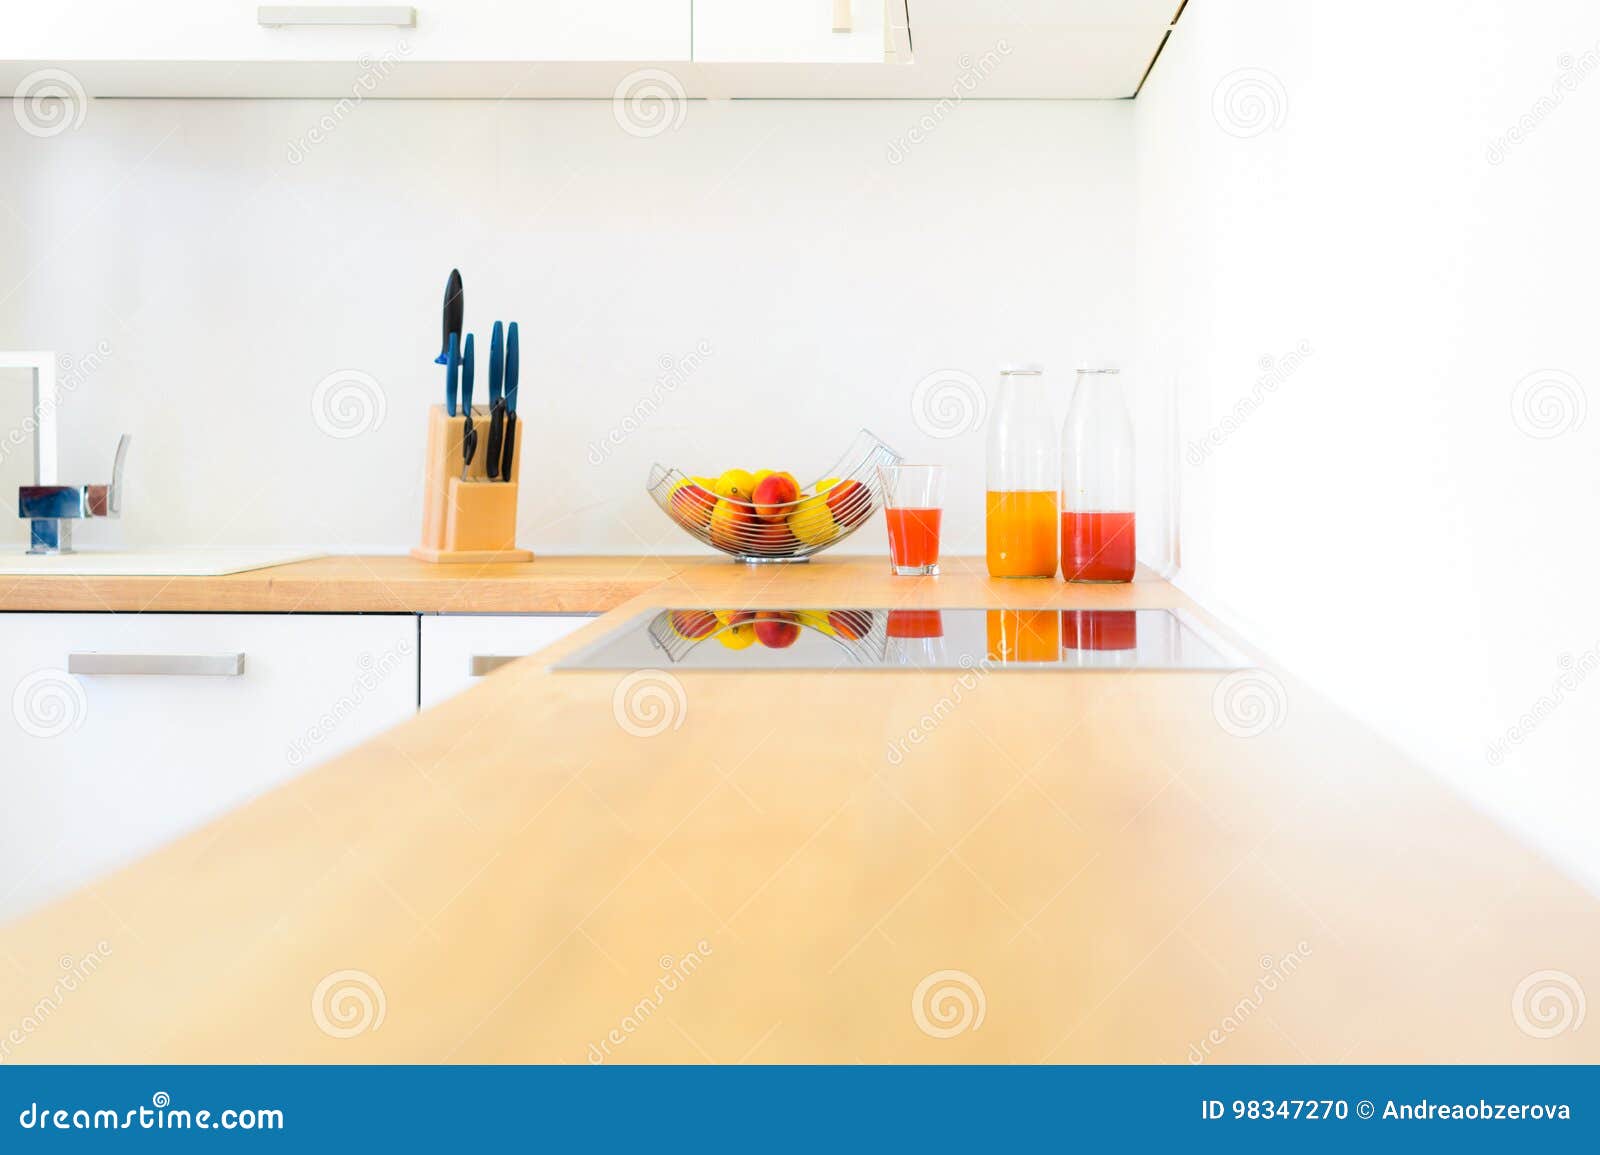 modern kitchen counter with induction hob, fresh fruit and homemade lemonade